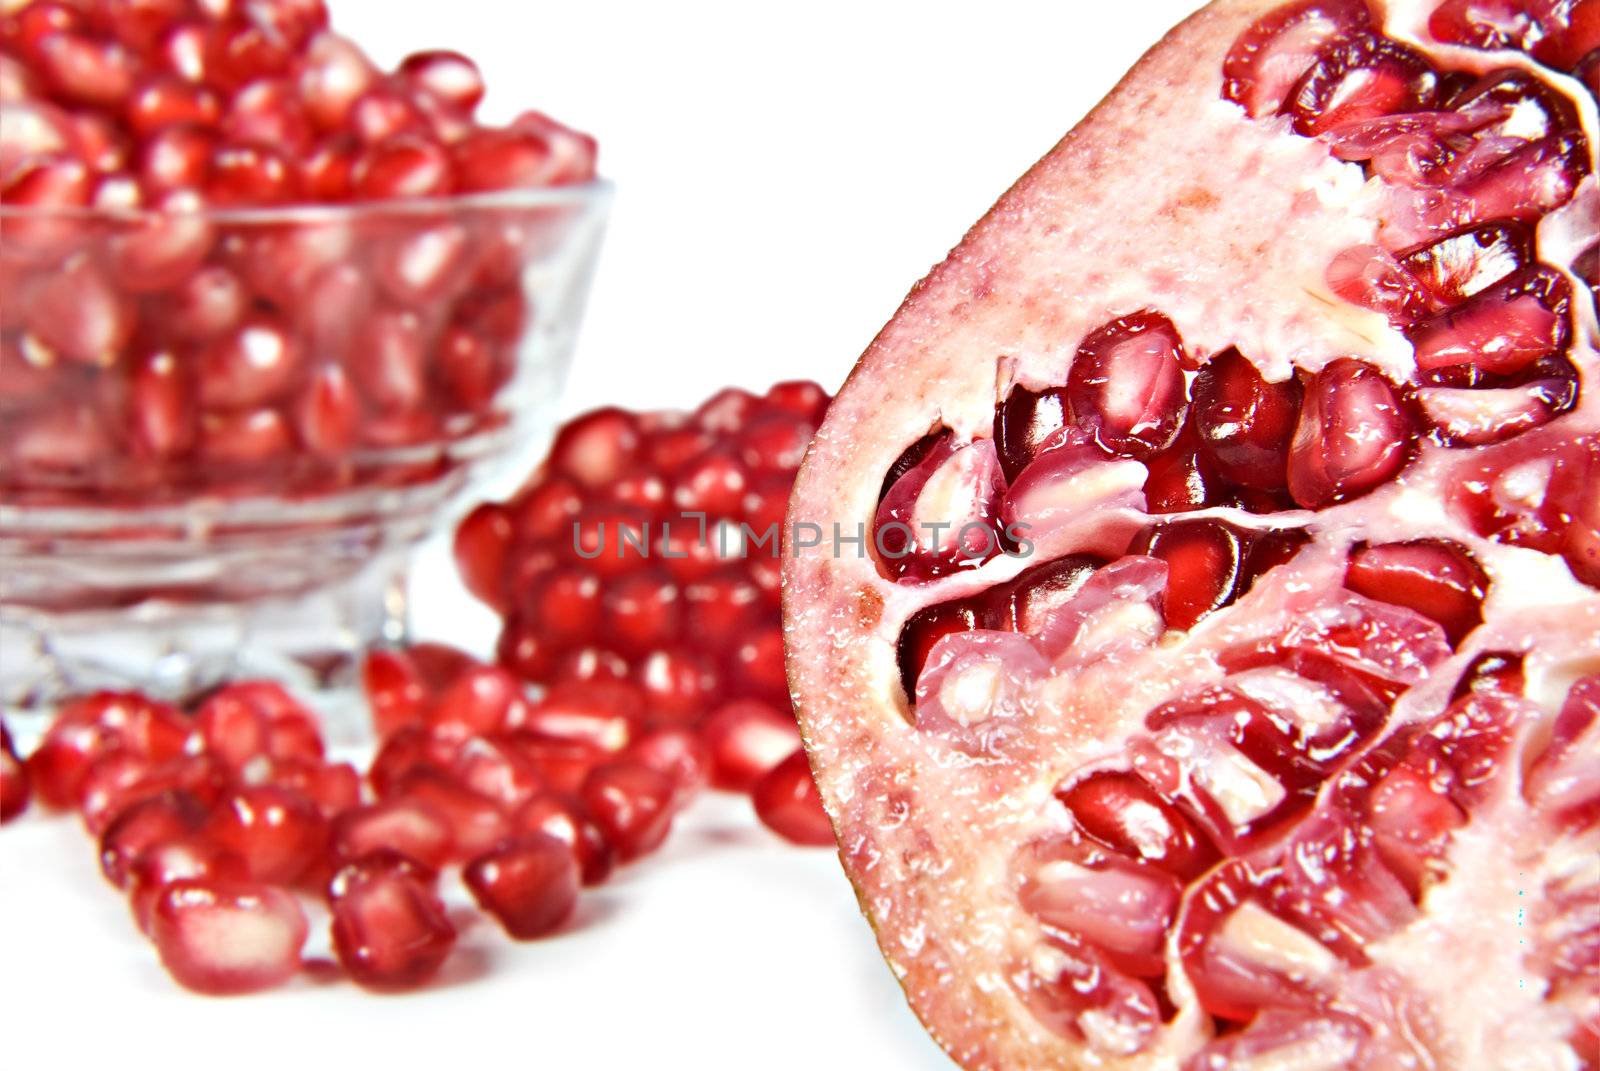 Pomegranate fruit and pipps by tish1